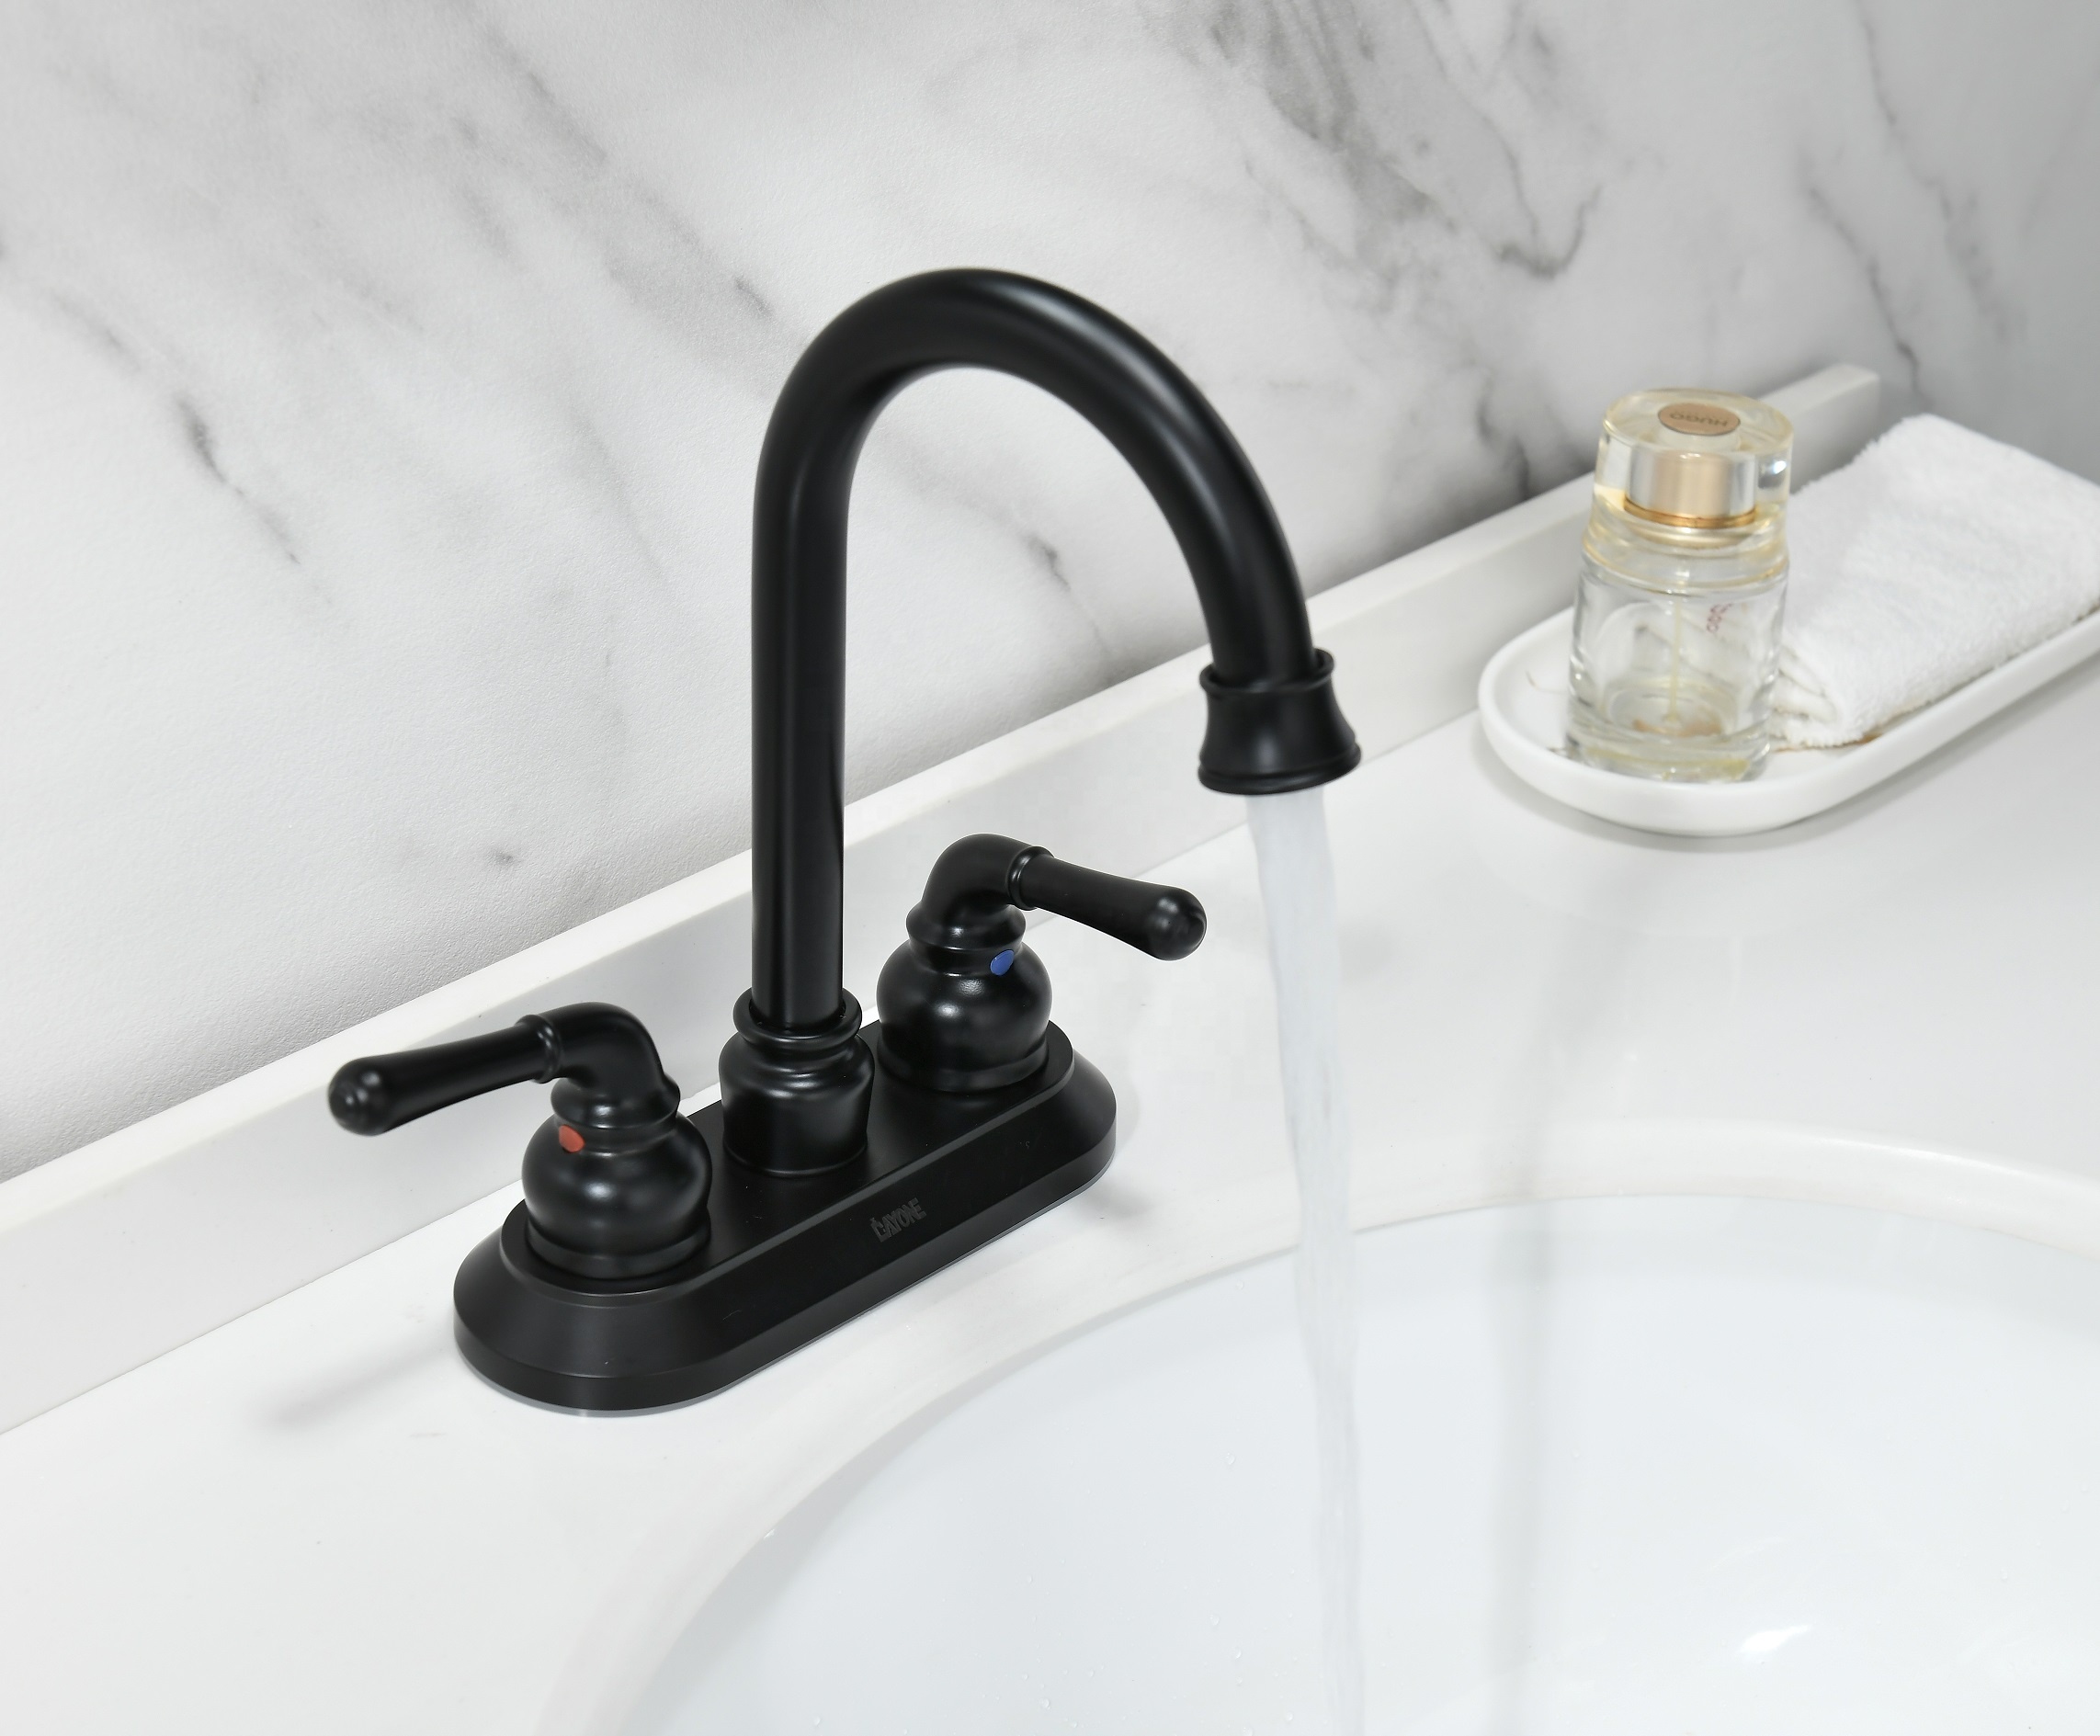 Hot Sale American Style Classical Style Two Handles Black Basin Faucet Tap